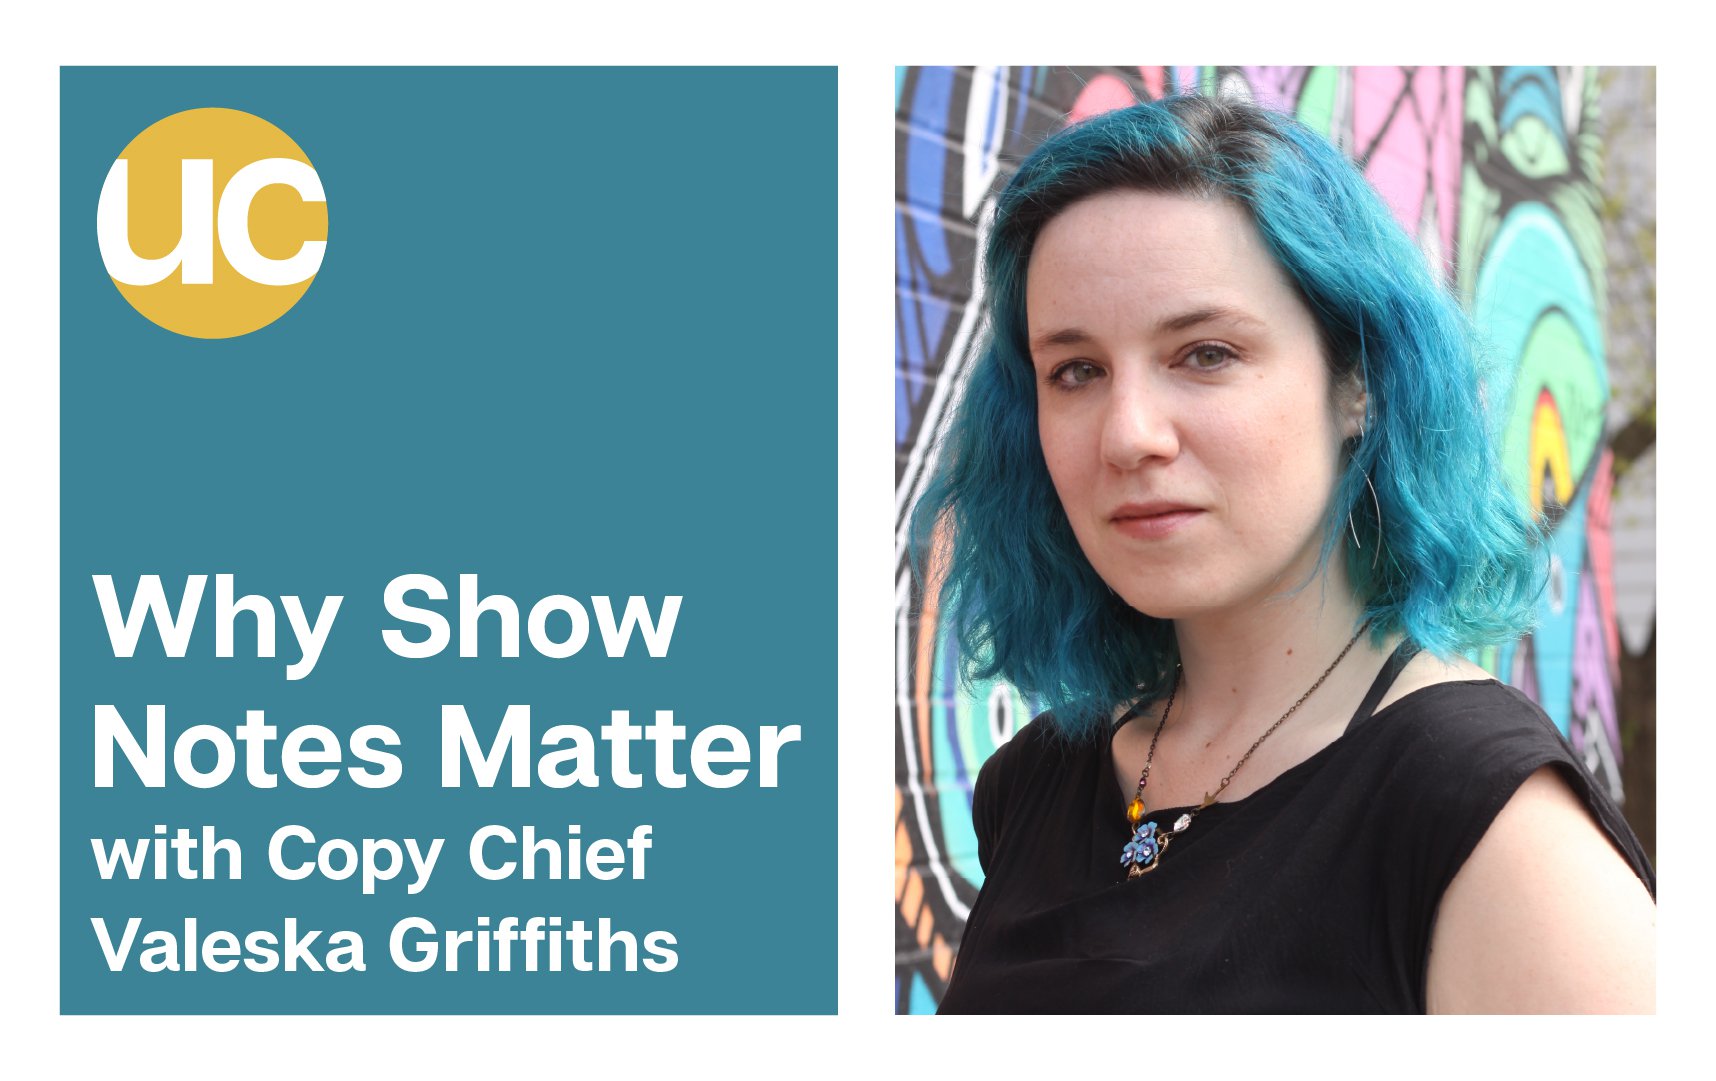 Why Show Notes Matter with Valeska Griffiths